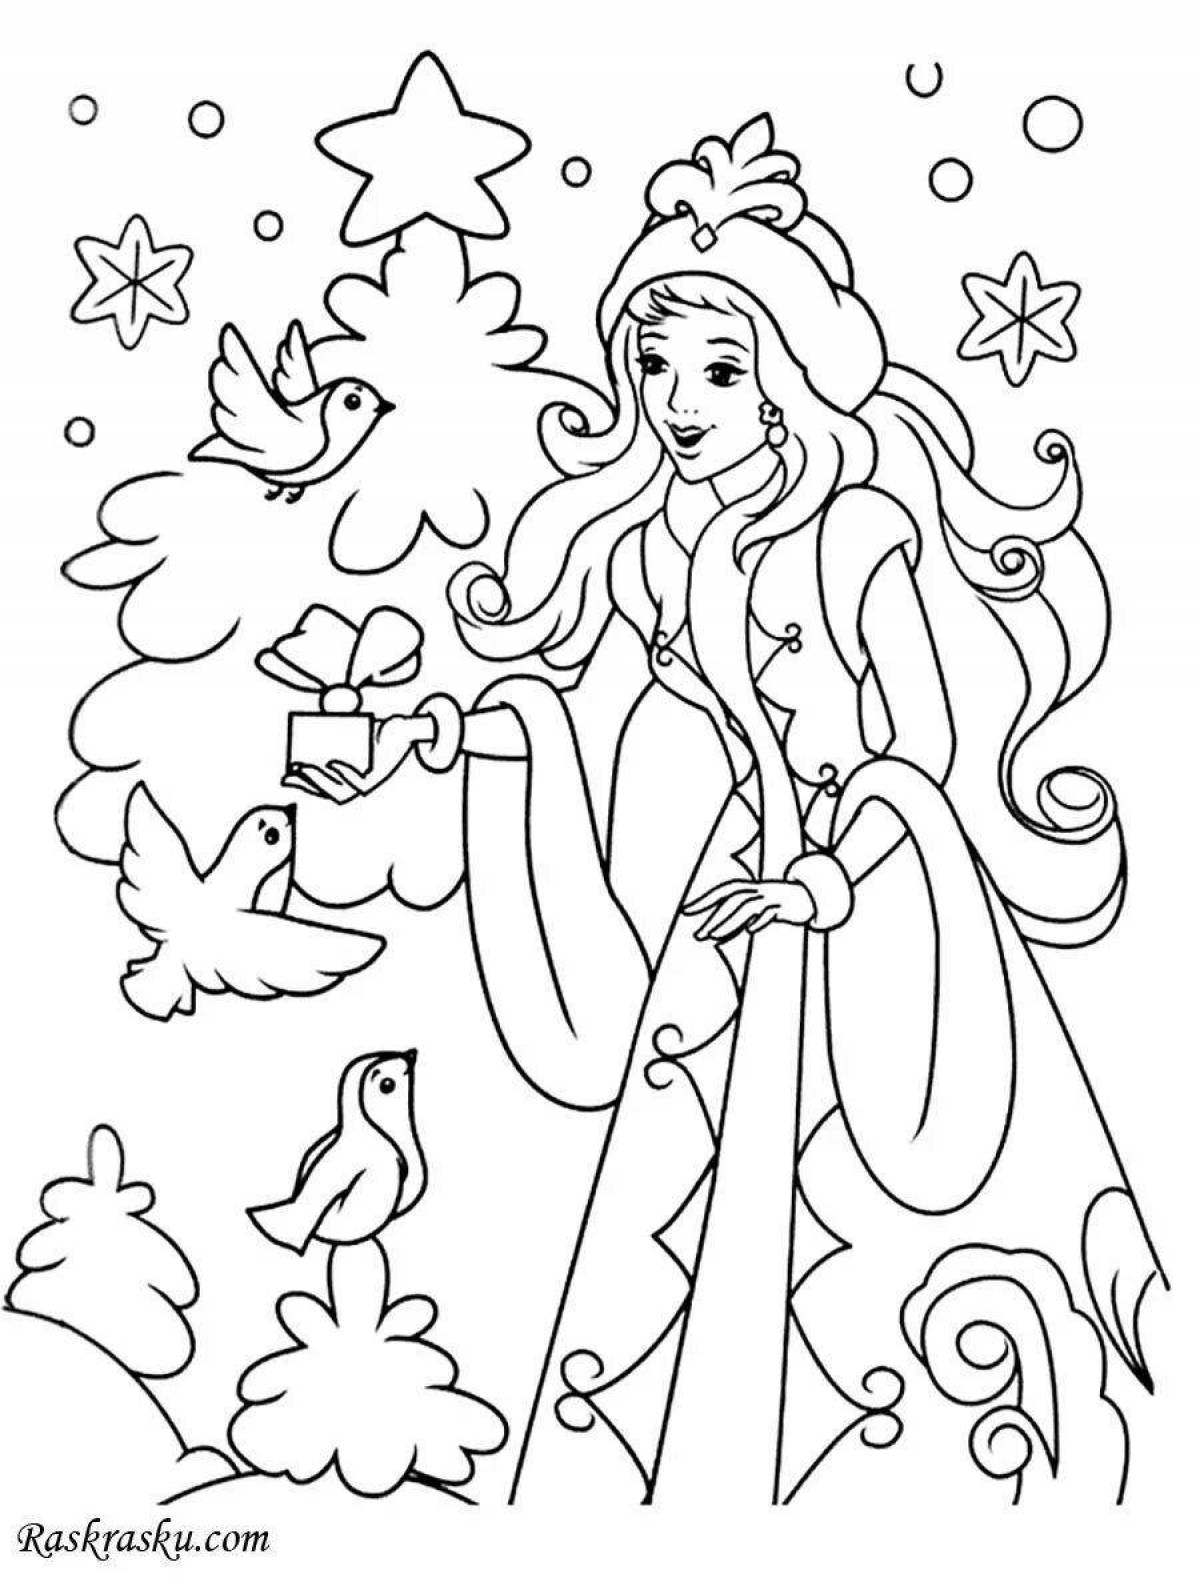 Glowing snow maiden coloring book for kids